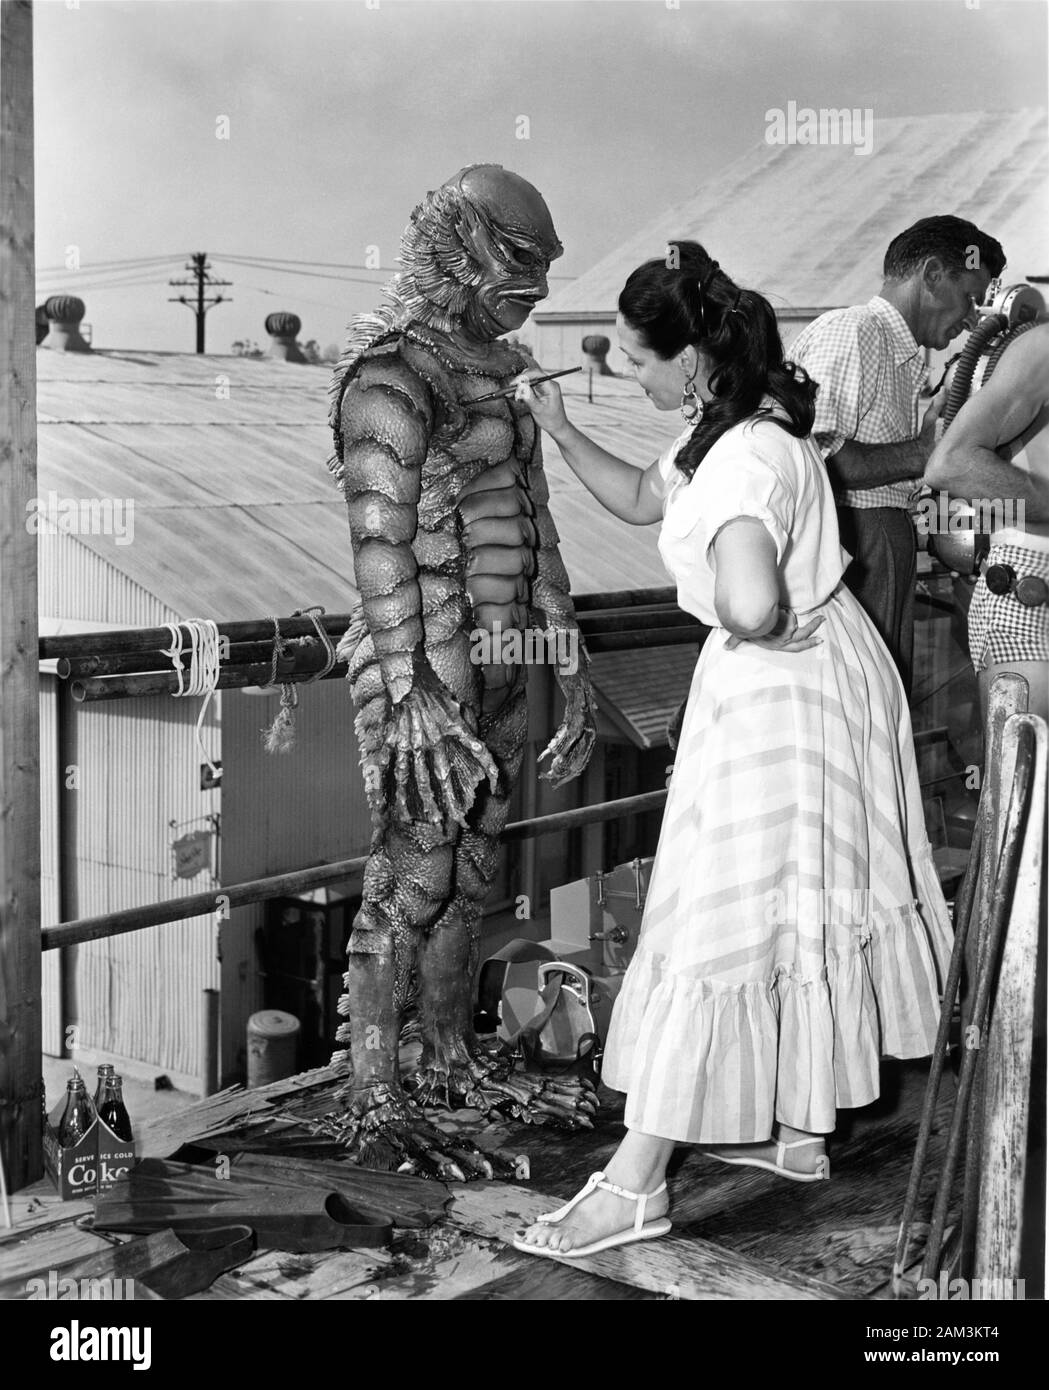 THE GILL MAN on set location candid having touch up from make-up artist during filming of CREATURE FROM THE BLACK LAGOON 1954 director JACK ARNOLD filmed in 3D producer William Alland Universal International Pictures (UI) Stock Photo